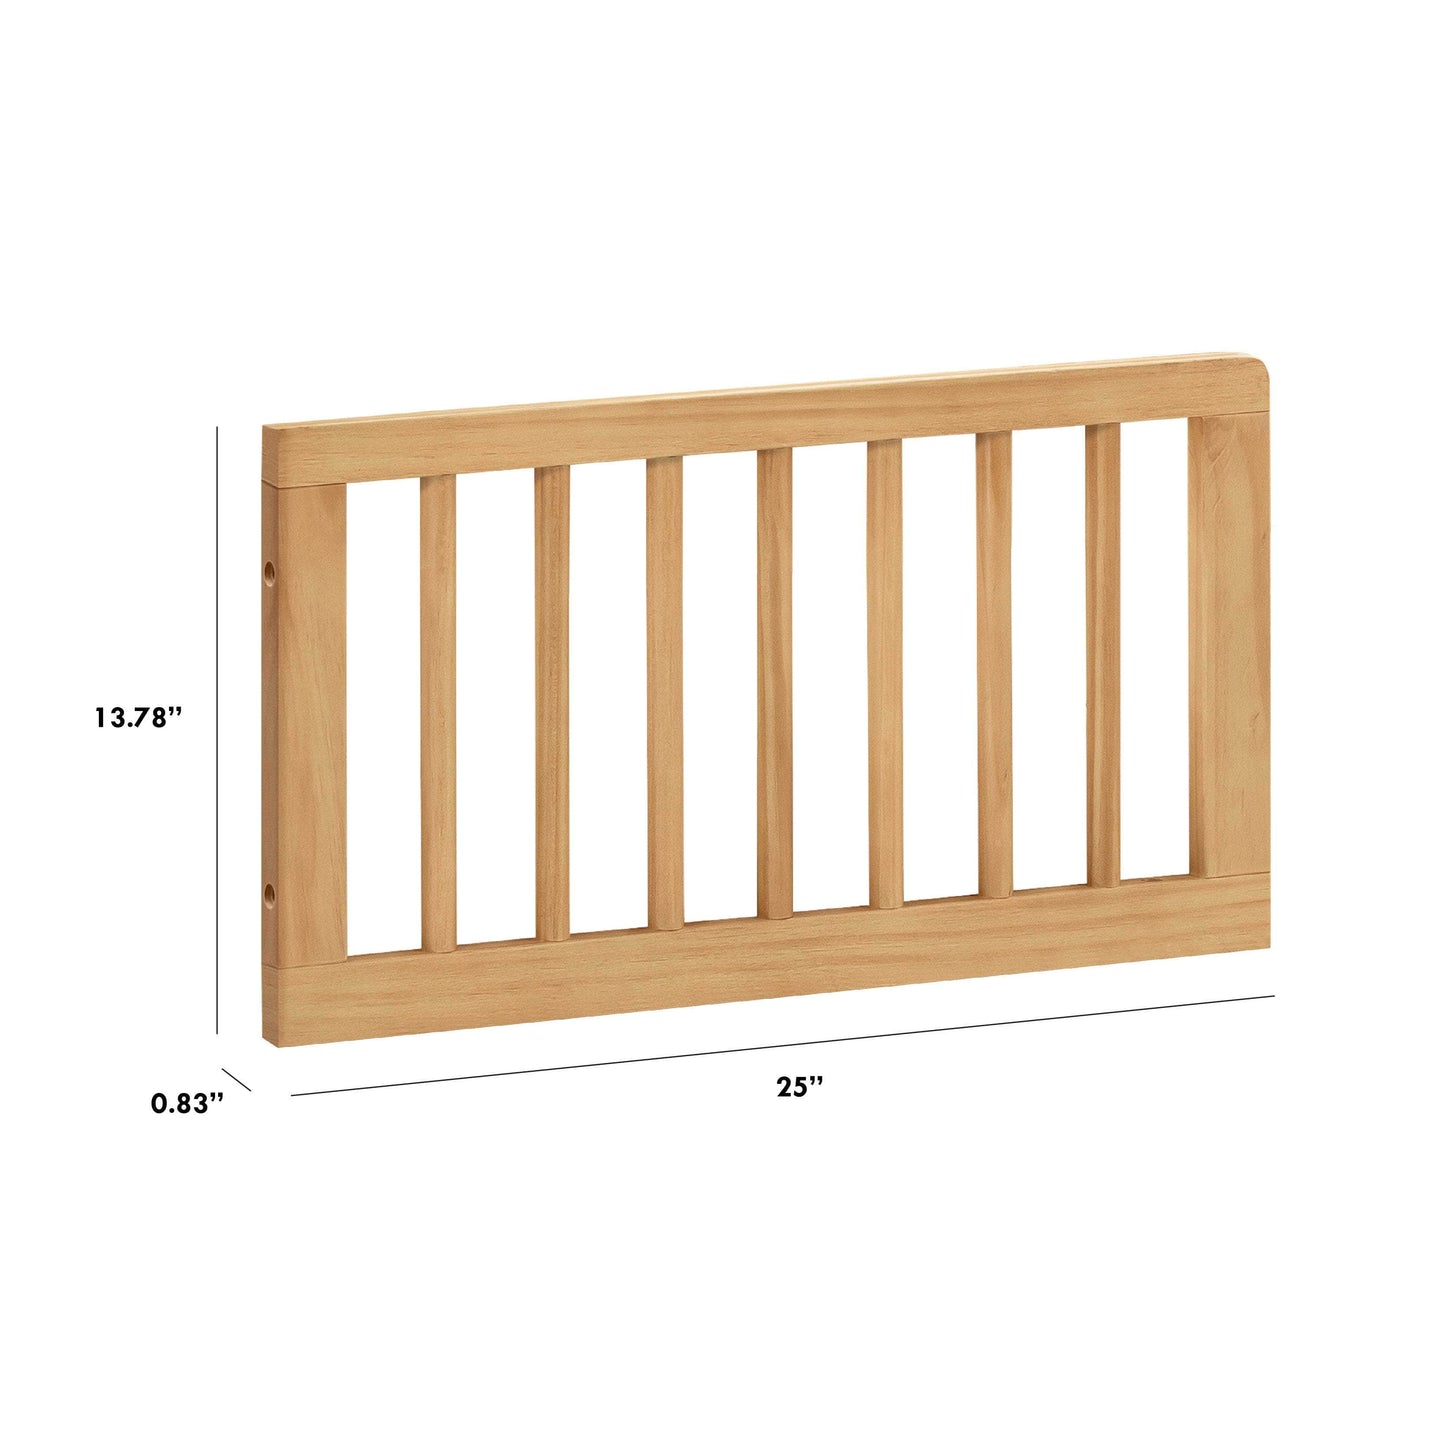 M19699HY,Toddler Bed Conversion Kit in Honey